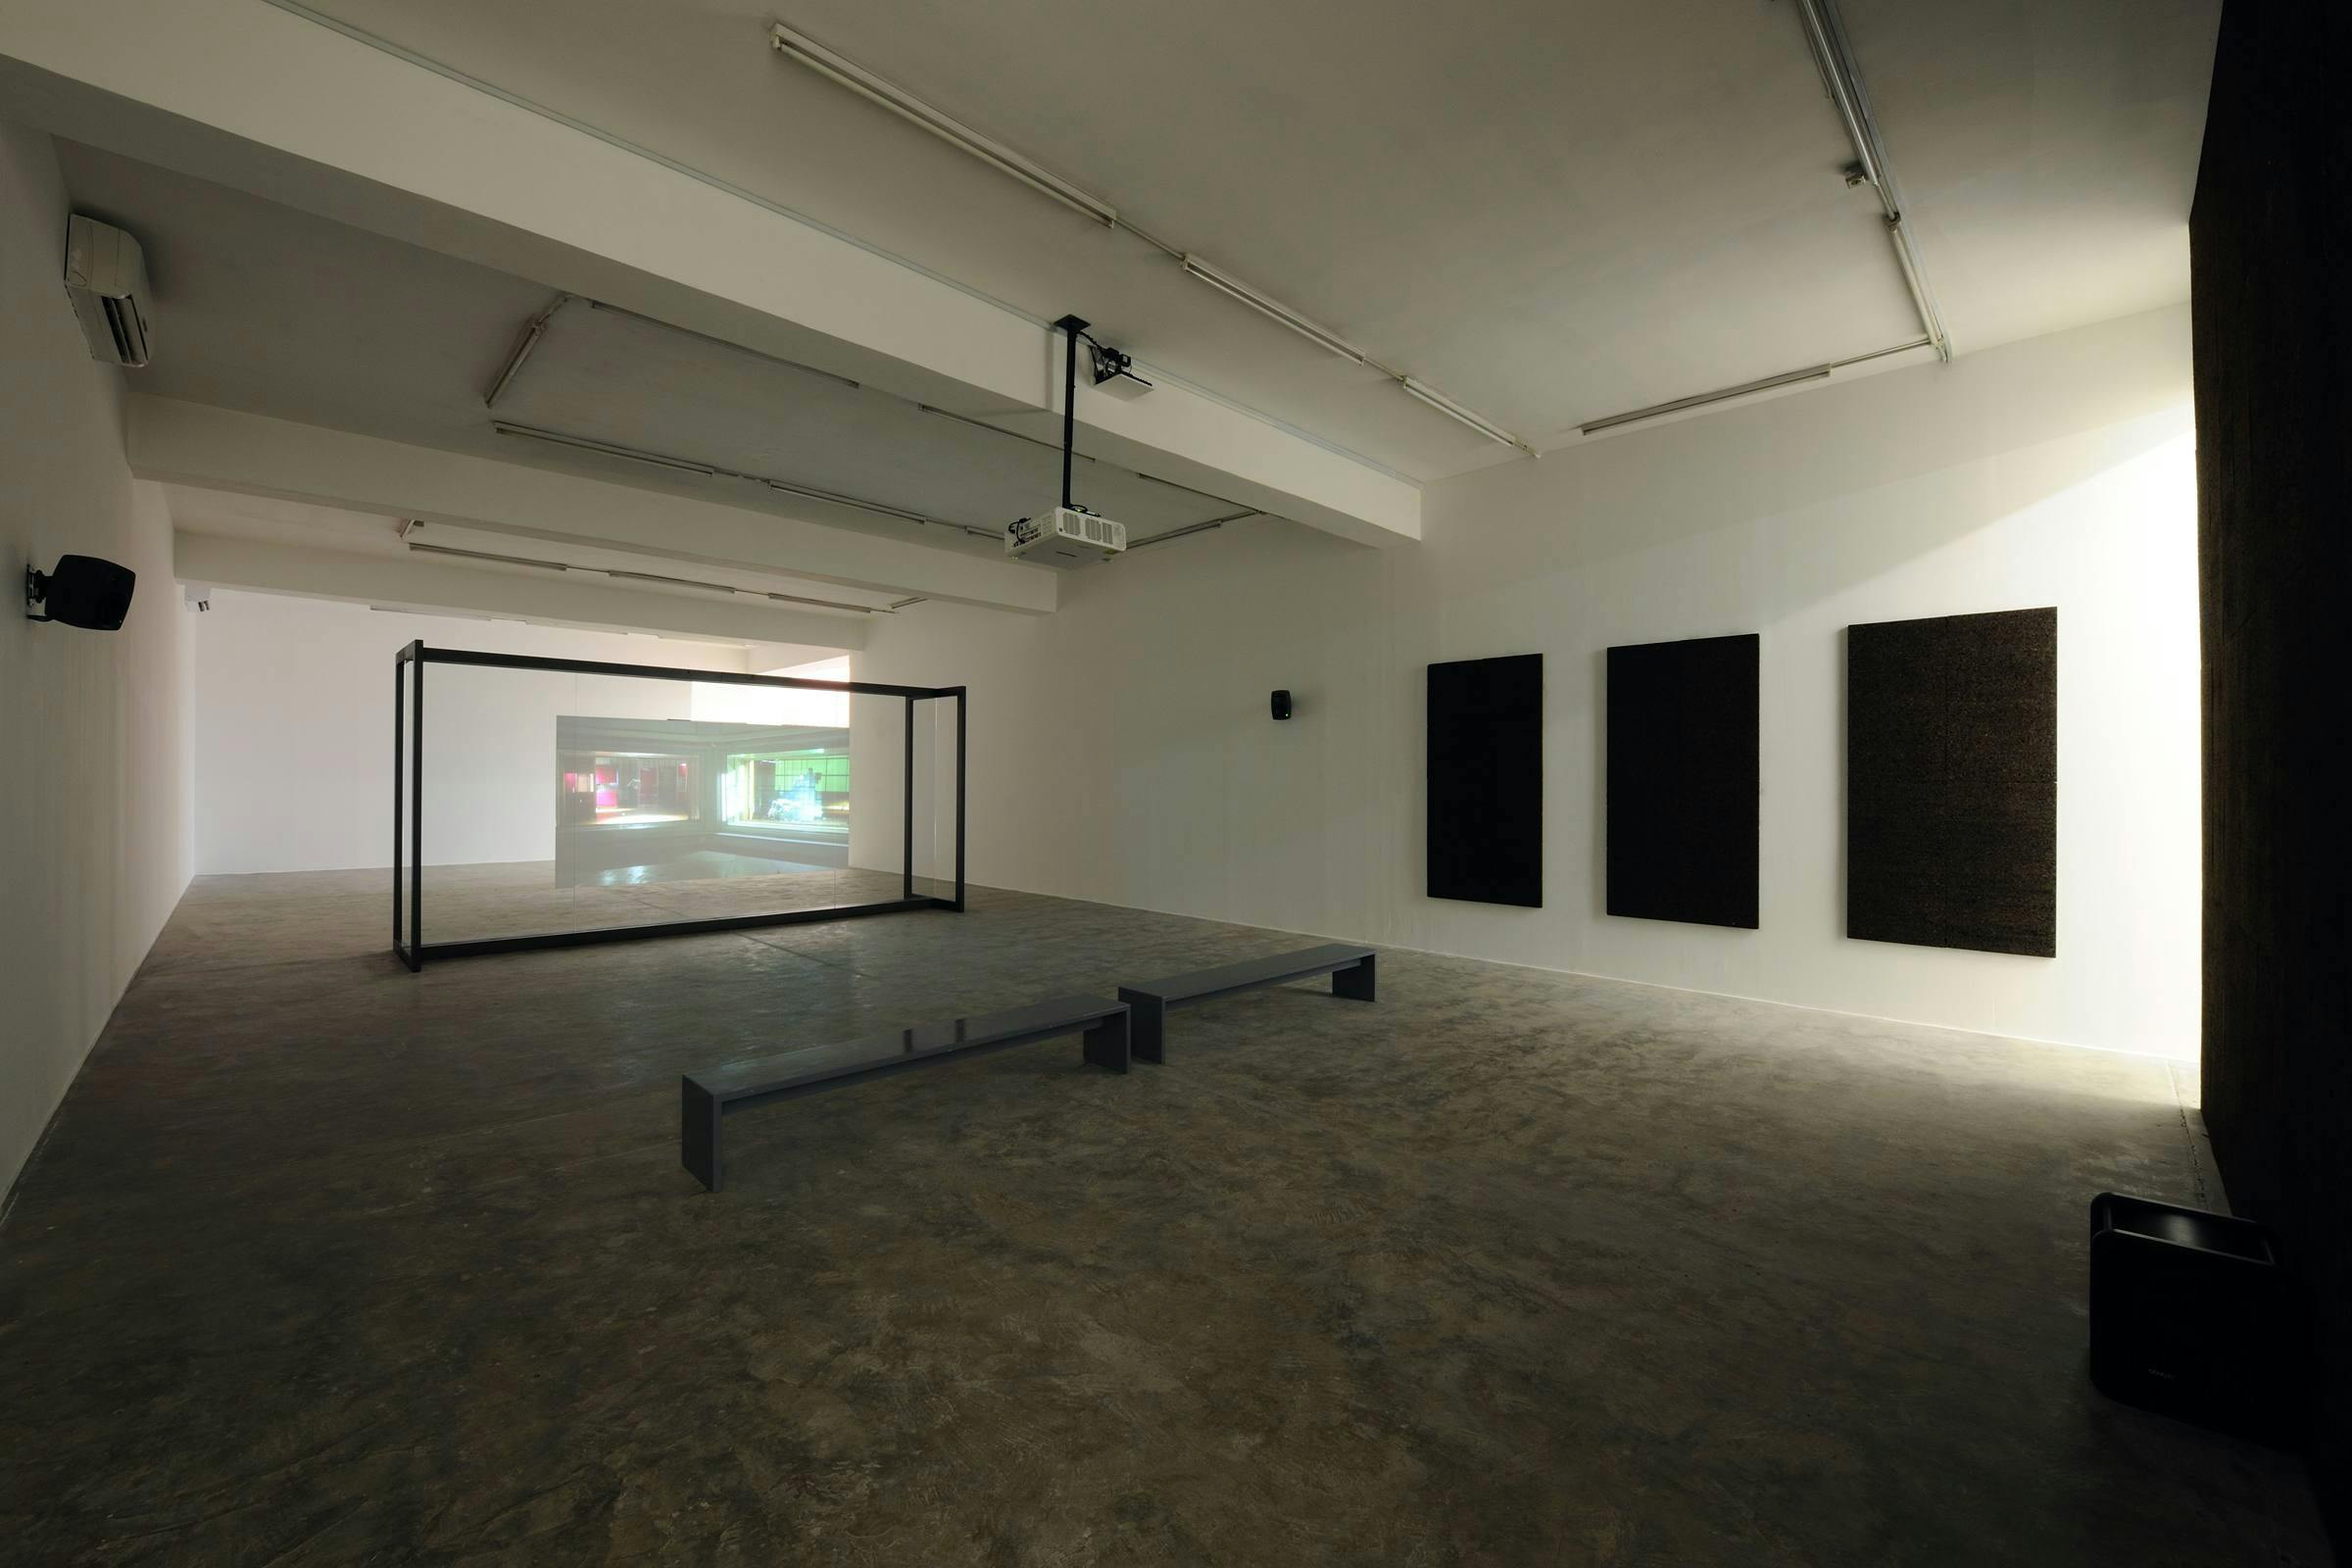 A video art work installed in a gallery. There are black sound panels installed on the walls and benches in front of the projection